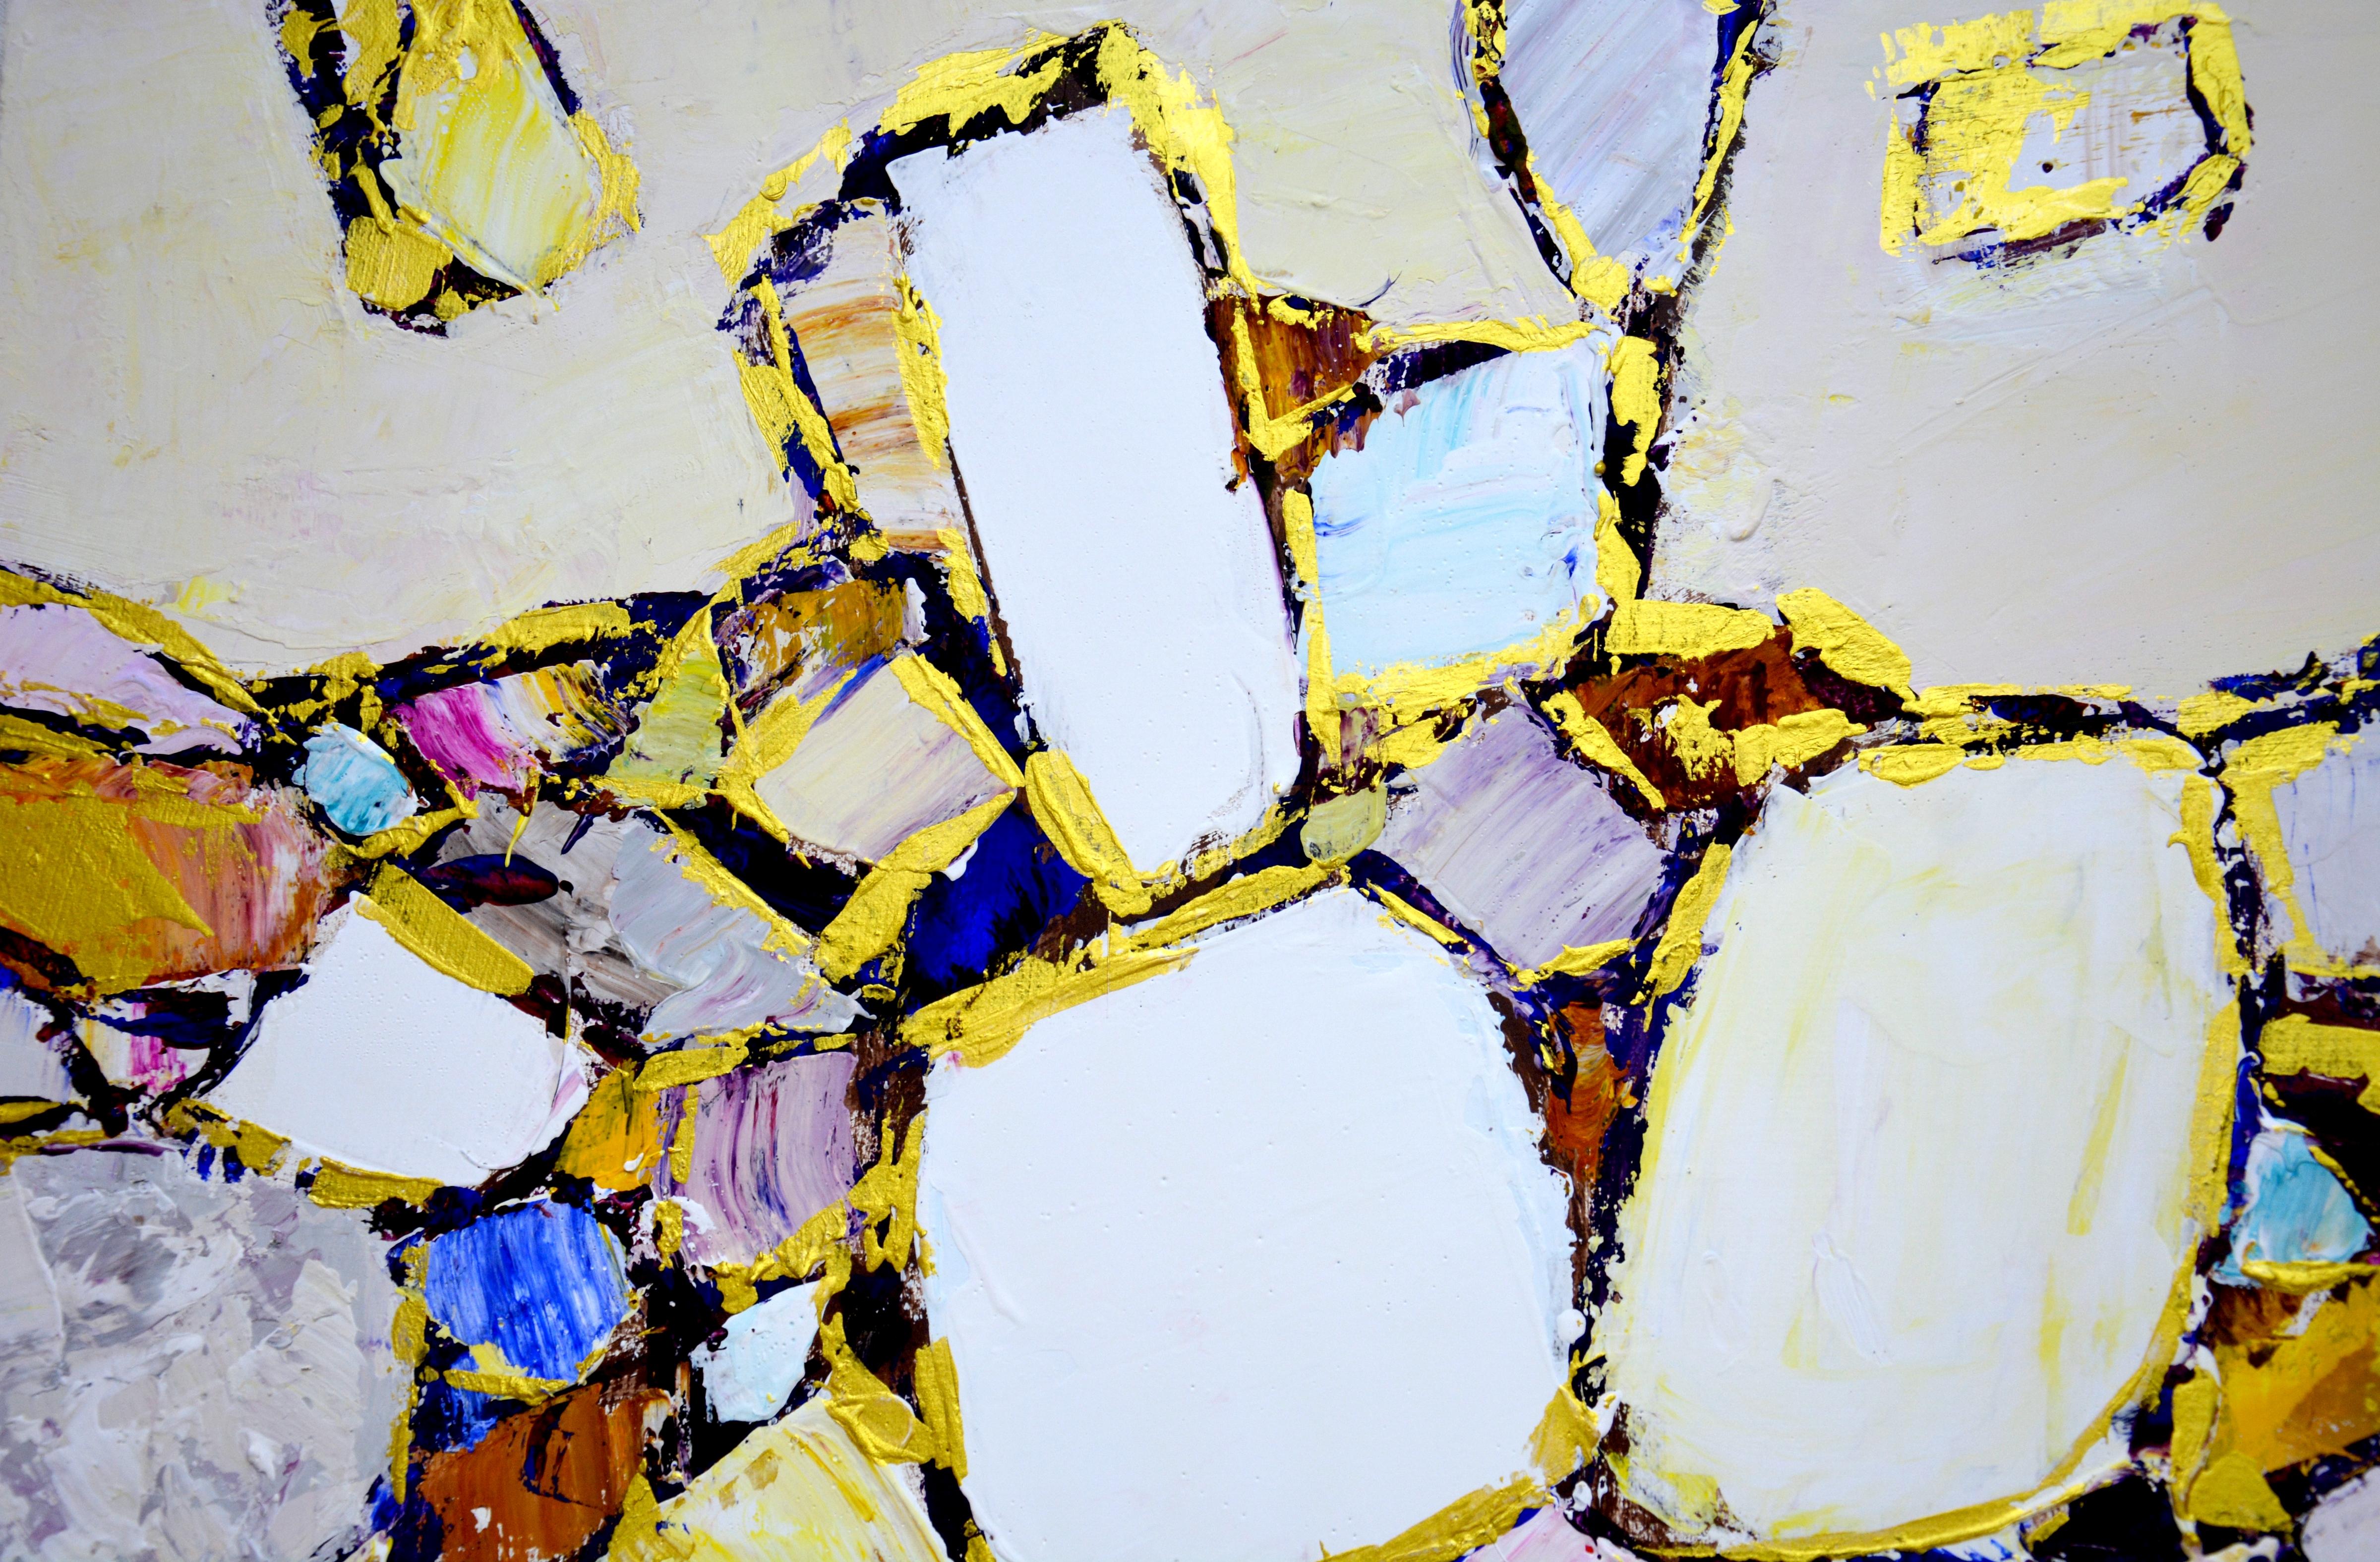 Gems and Gold. Abstract dynamic composition, filled with light, filled with air, using gold paint. Curved lines, shapes, textures made with a palette knife add expressiveness and texture to the surface. The details balance each other perfectly.